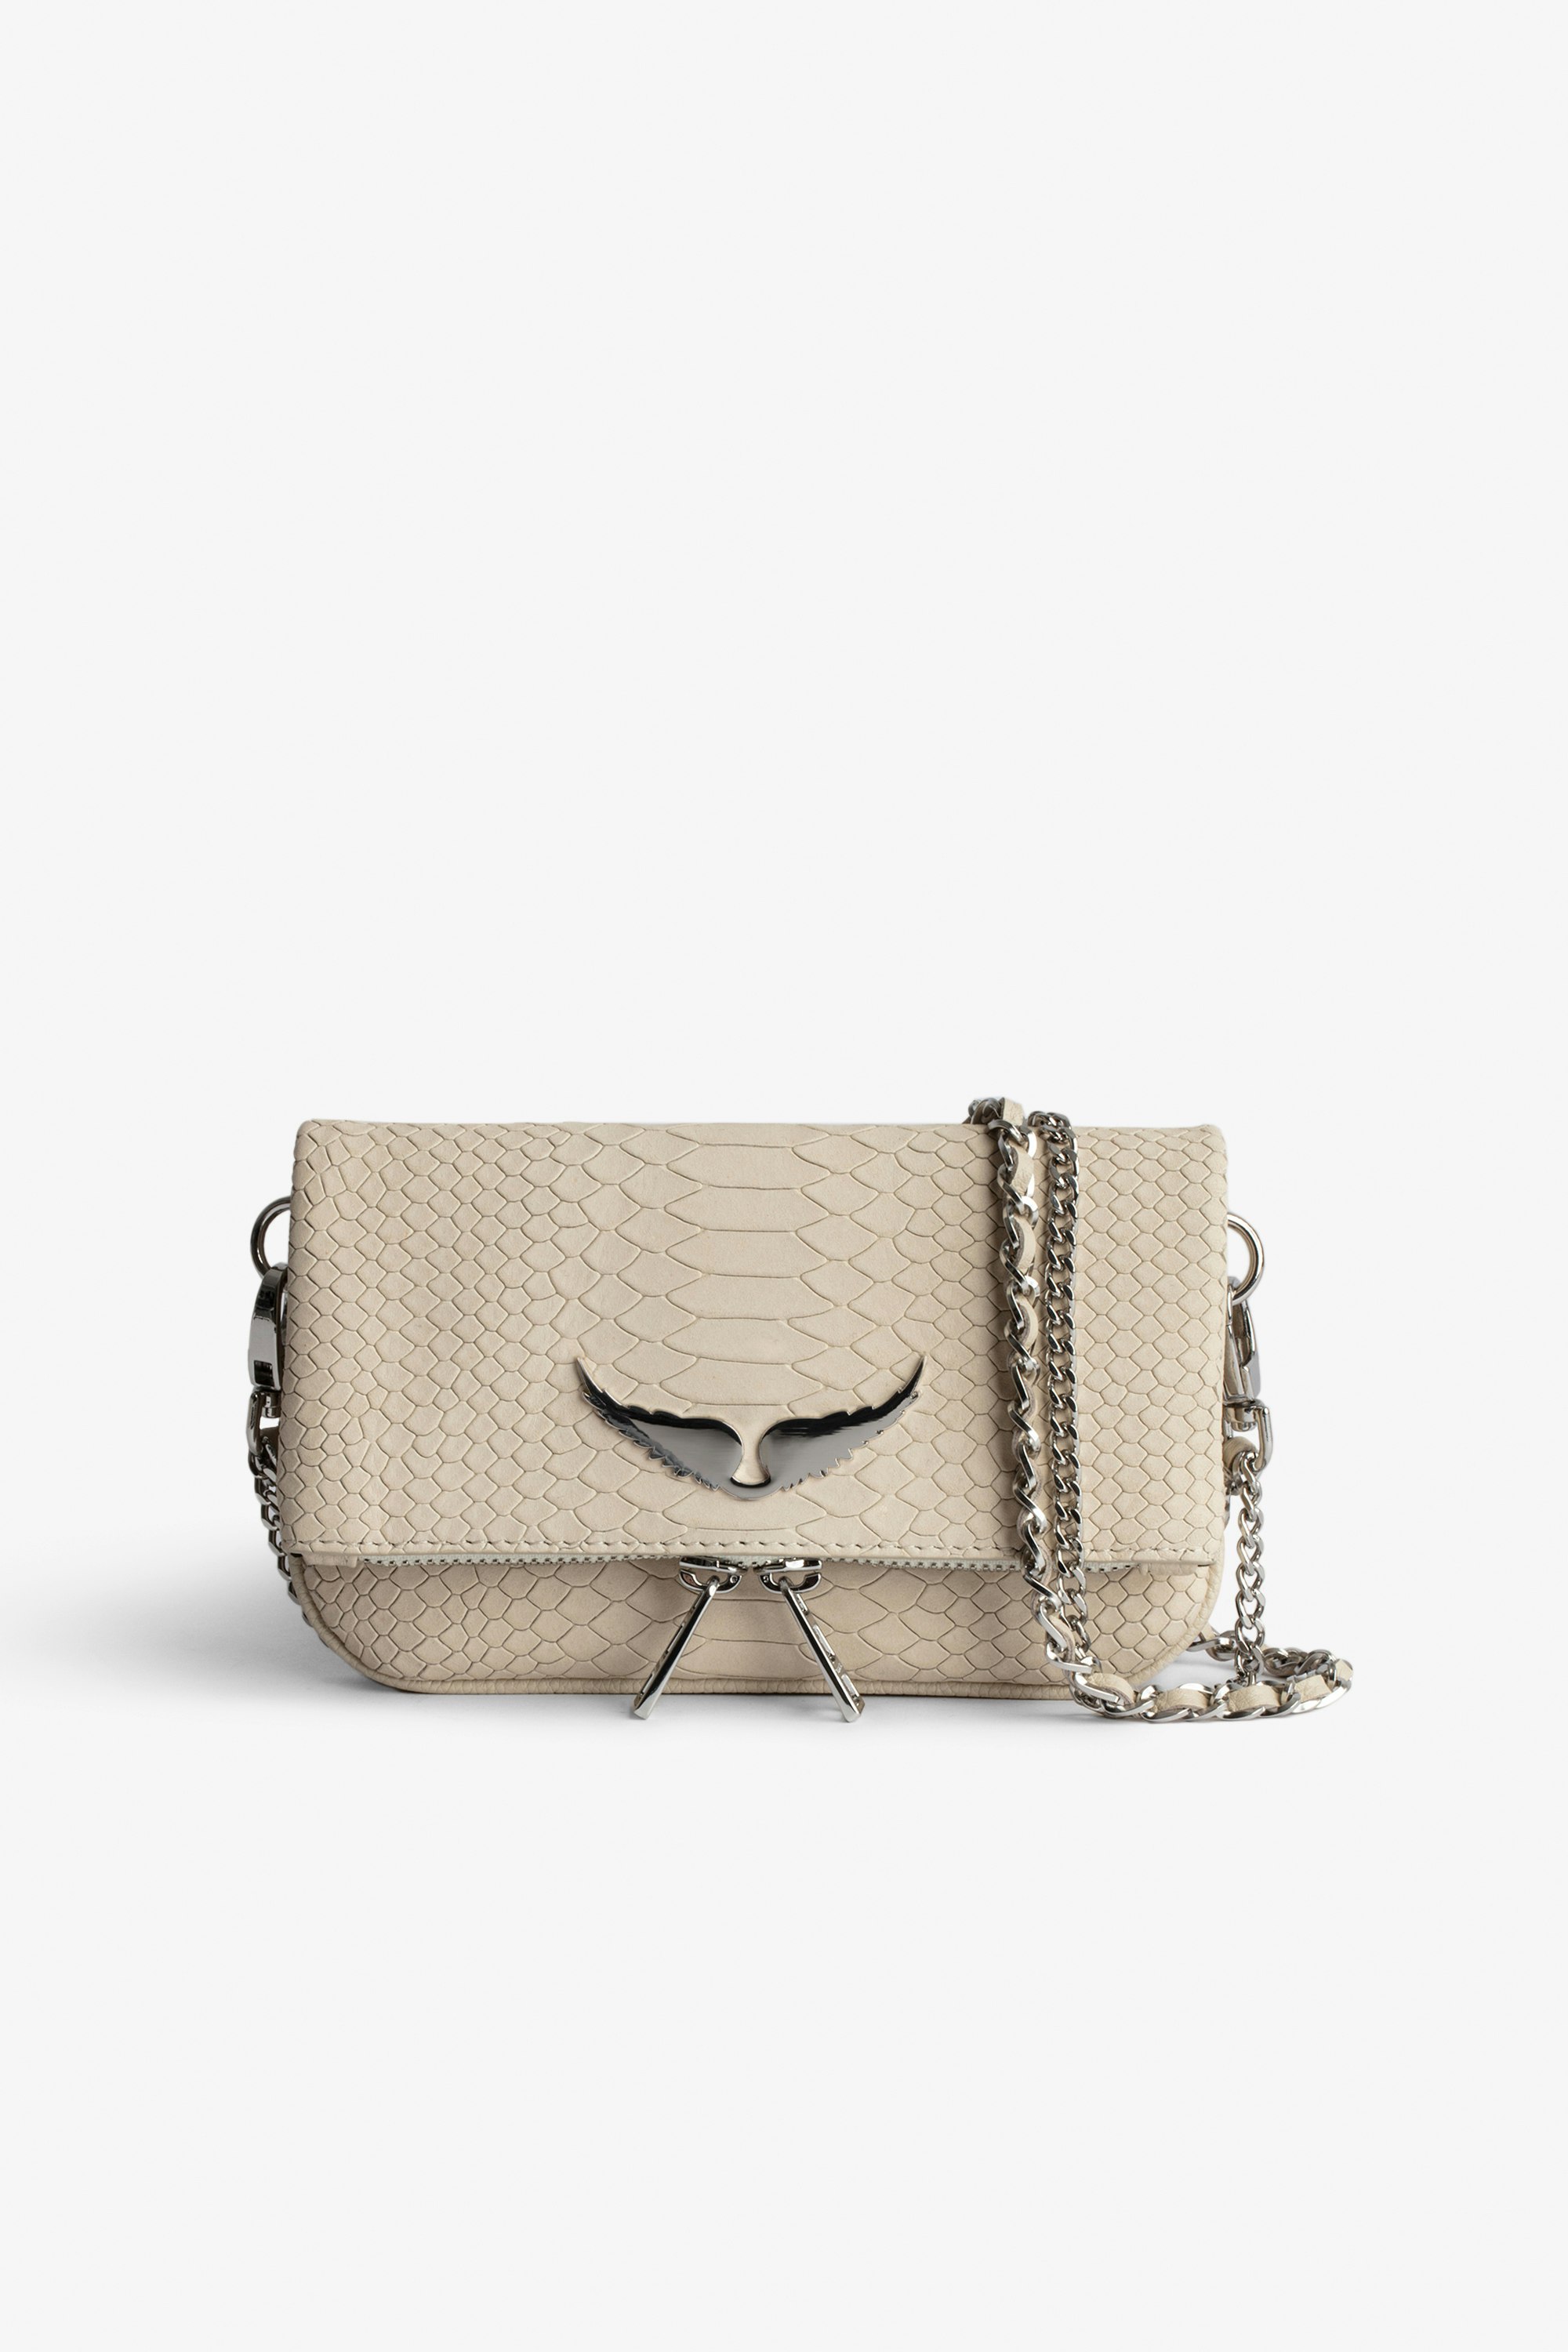 Nano Soft Savage Rock Clutch Women’s small clutch in ecru python-effect leather with double leather-and-metal chain